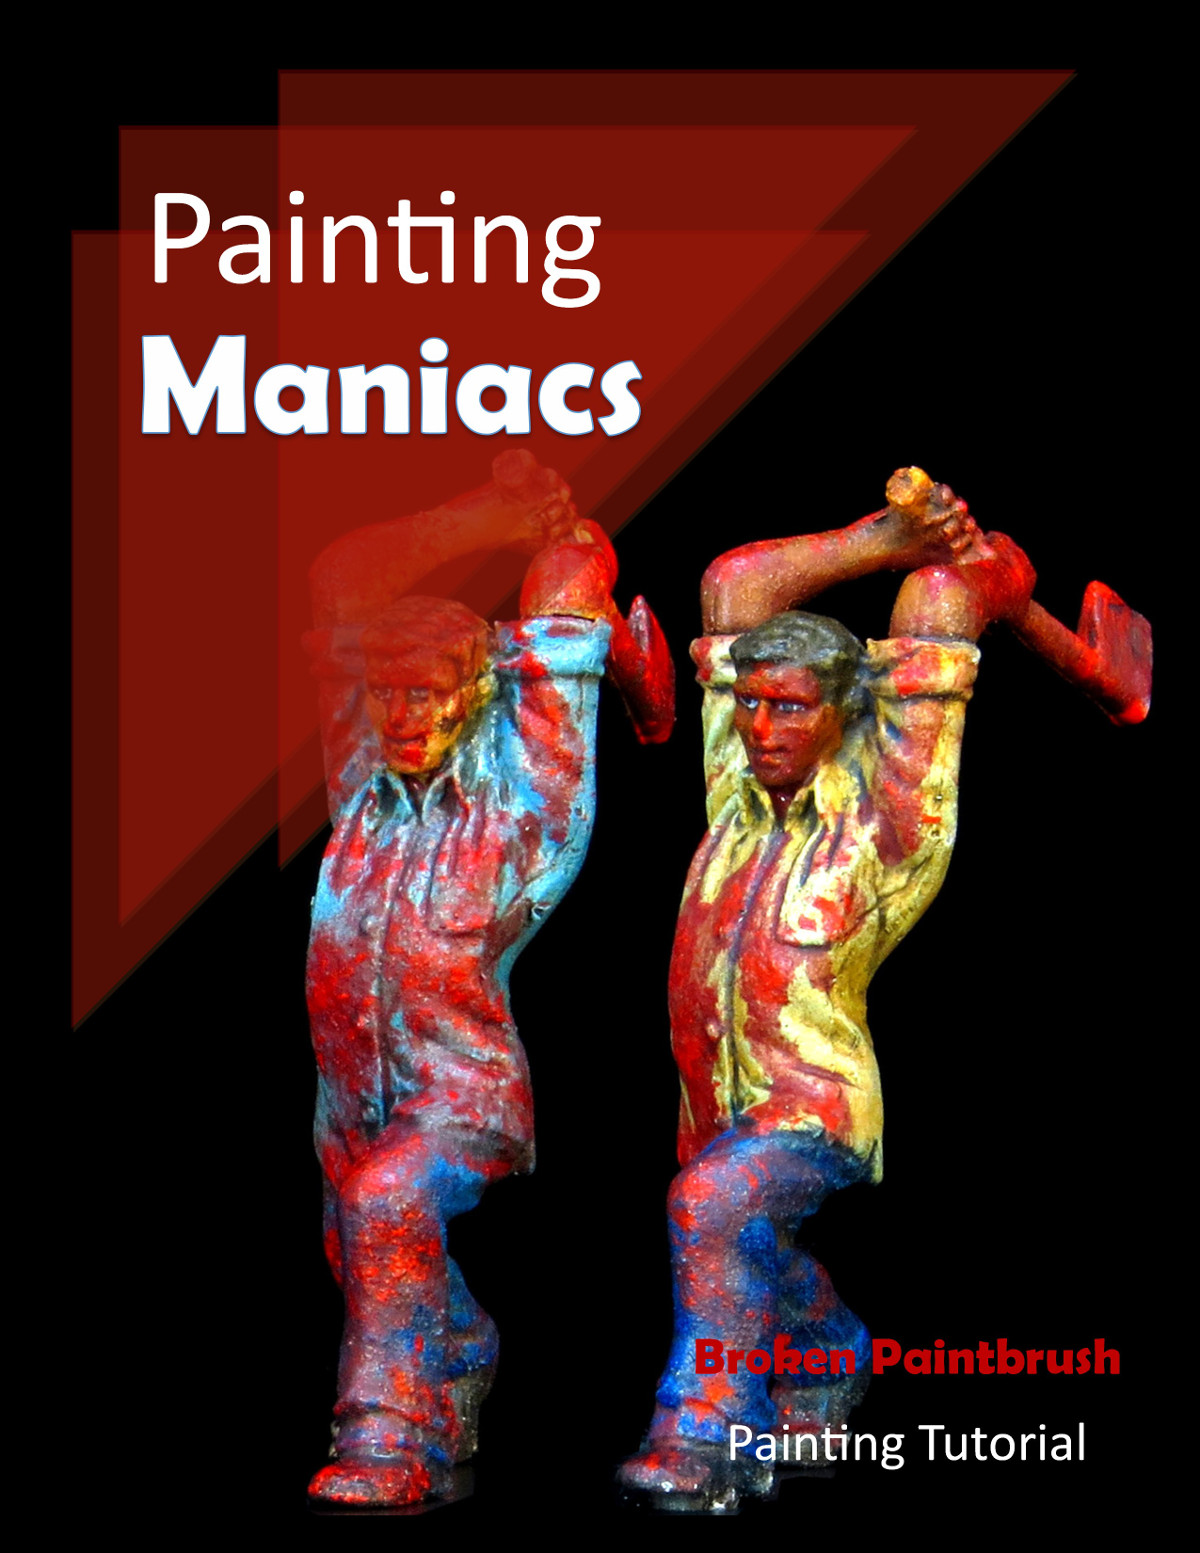 Painting Tutorial for the Maniacs